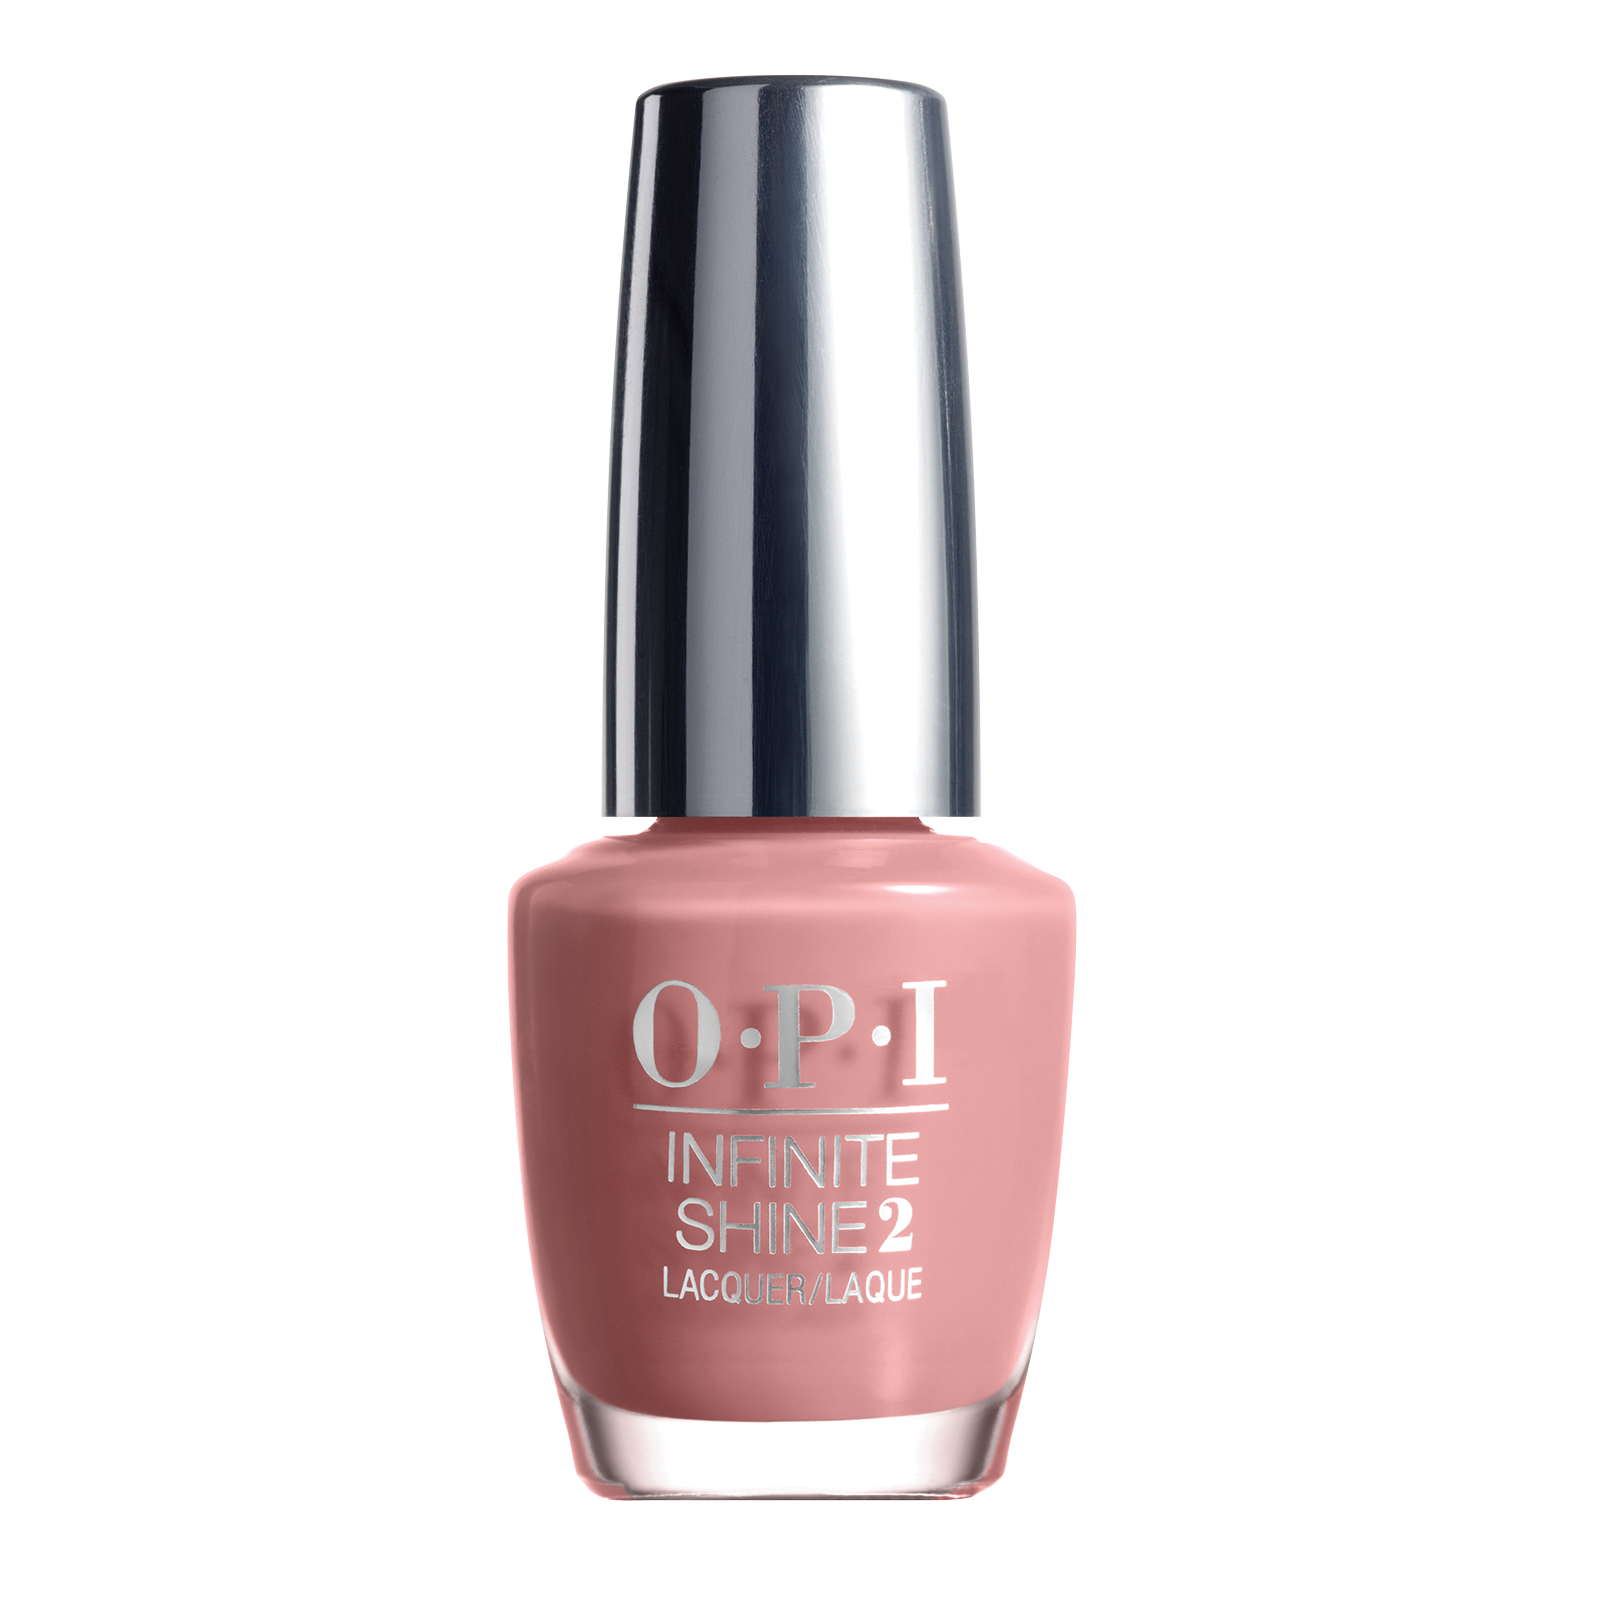 You Can Count On It - OPI | CosmoProf